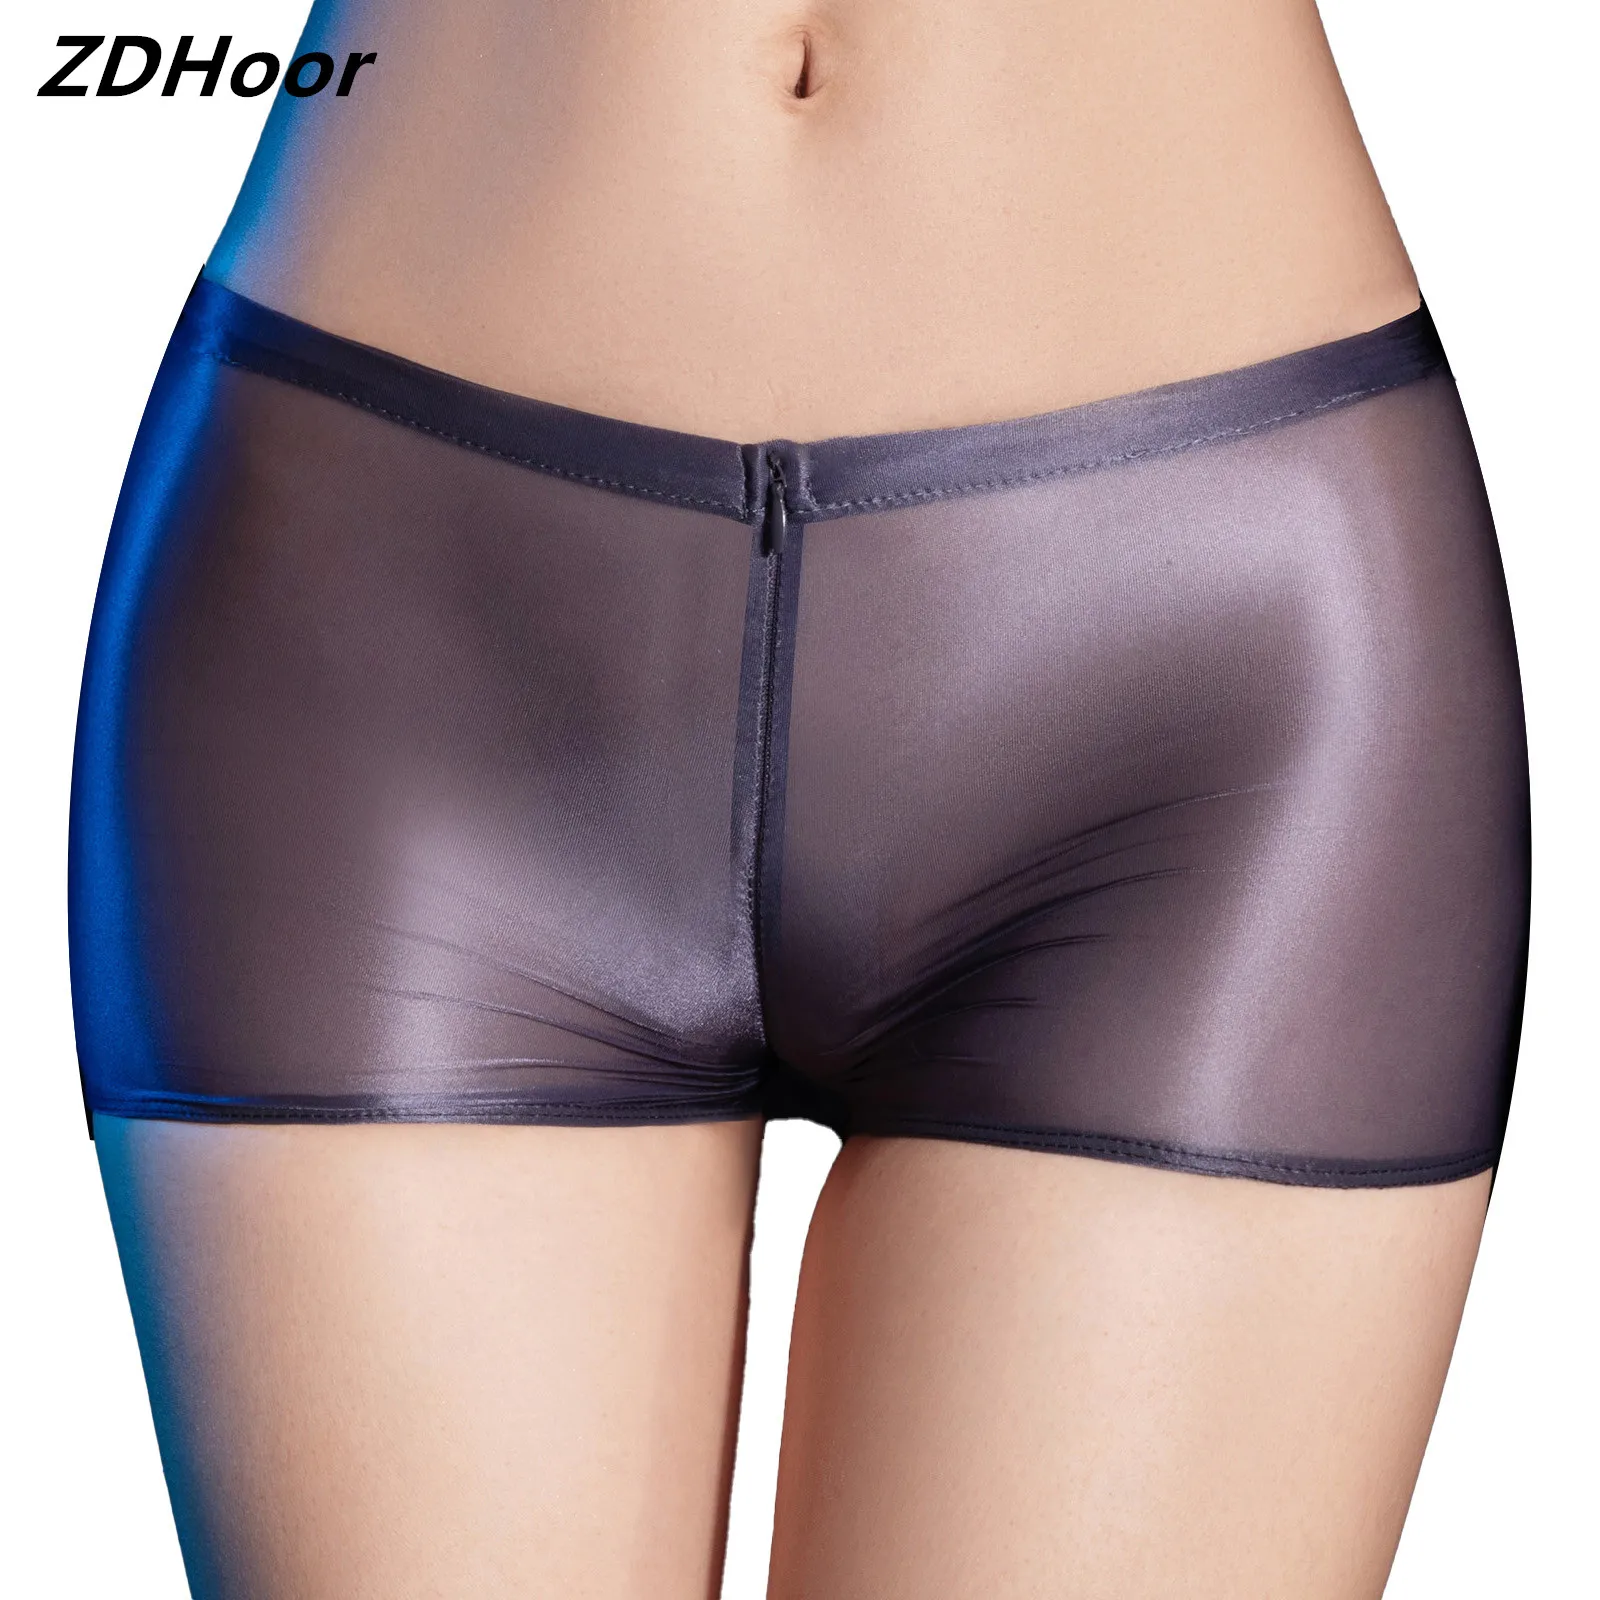 

Womens Glossy Zipper Crotch Boyshorts Low Rise See-Through Panties Underpants Lingerie Underwear